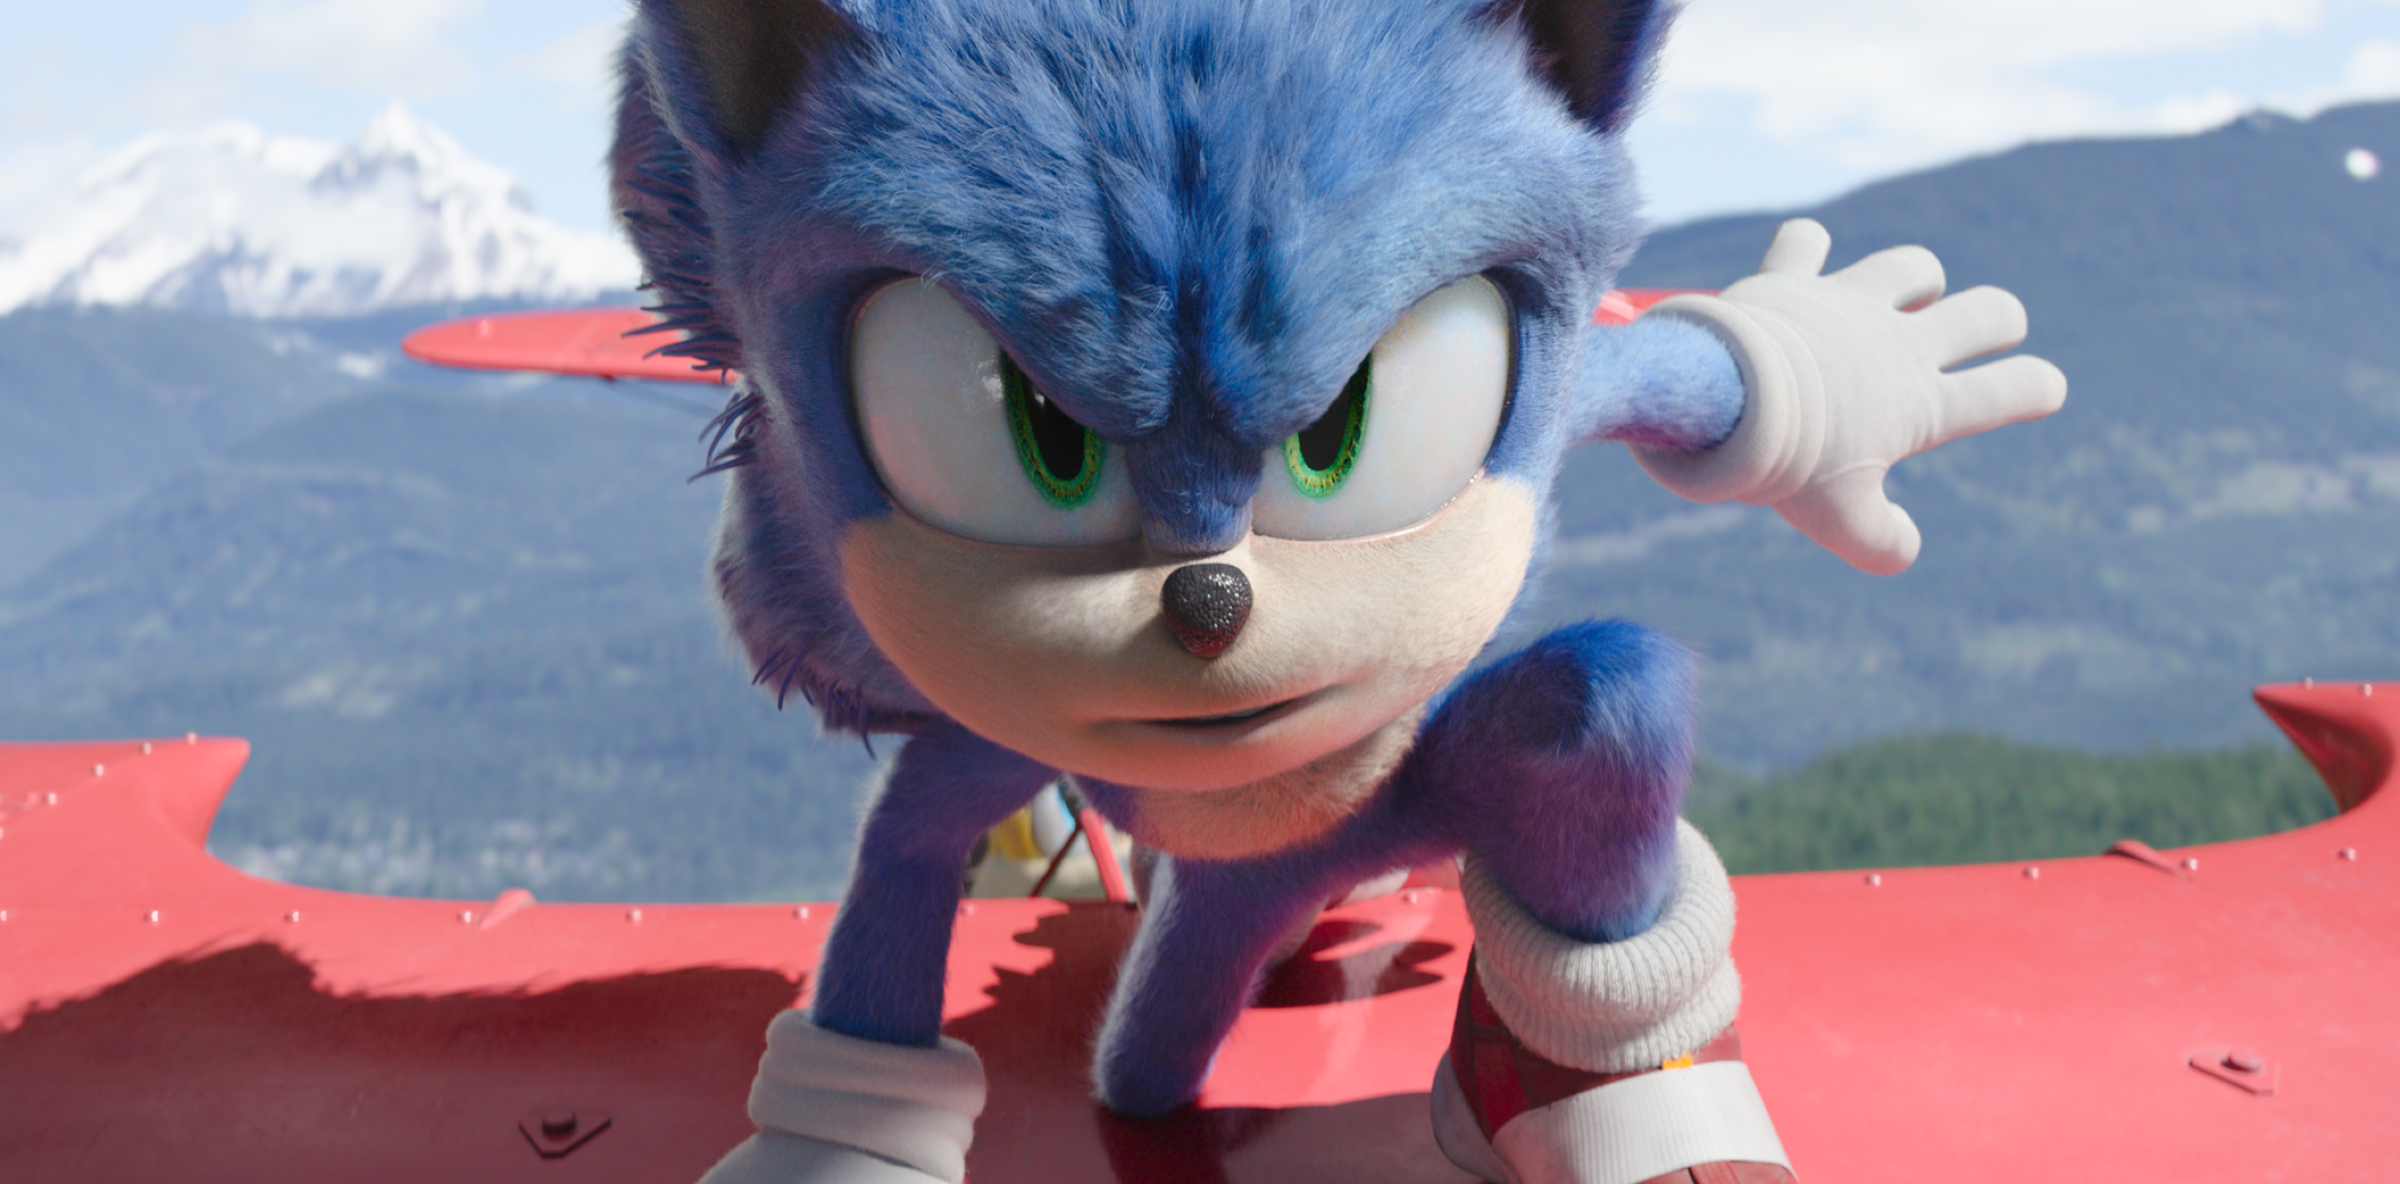 Super Sonic: Director Jeff Fowler Brings an Iconic Speedster Back to the  Big Screen - Boxoffice